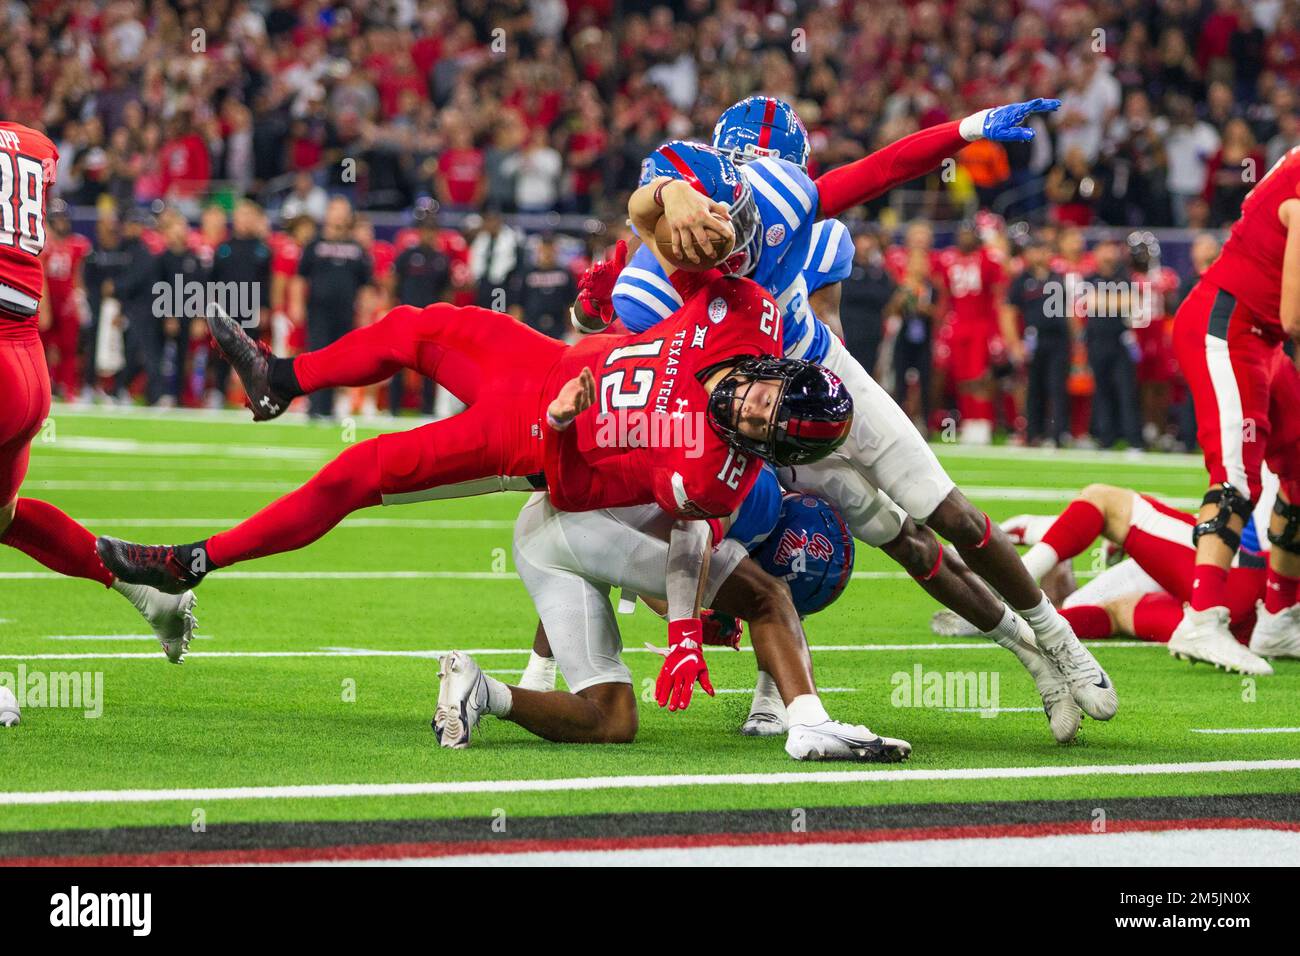 Texas Tech Red Raiders quarterback Tyler Shough (12) and Ole Miss Rebels linebacker Khari Coleman (23) collide at the goal line during the 2022 TaxAct Stock Photo